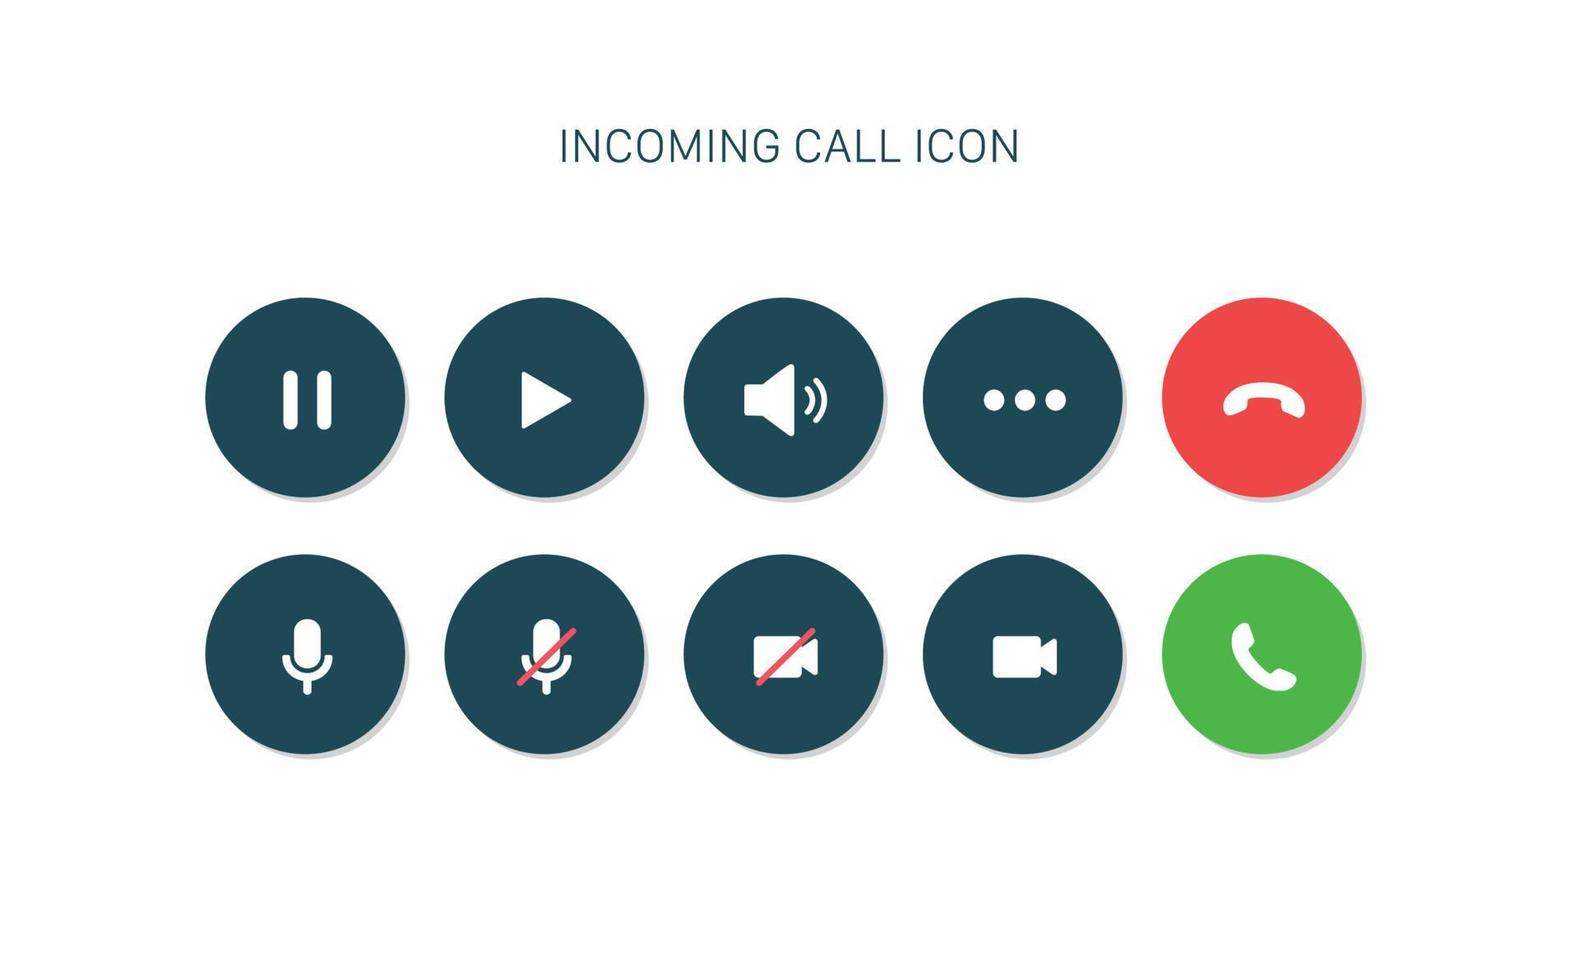 Incoming Phone Call Screen User Interface UI .For website and mobile apps vector illustration